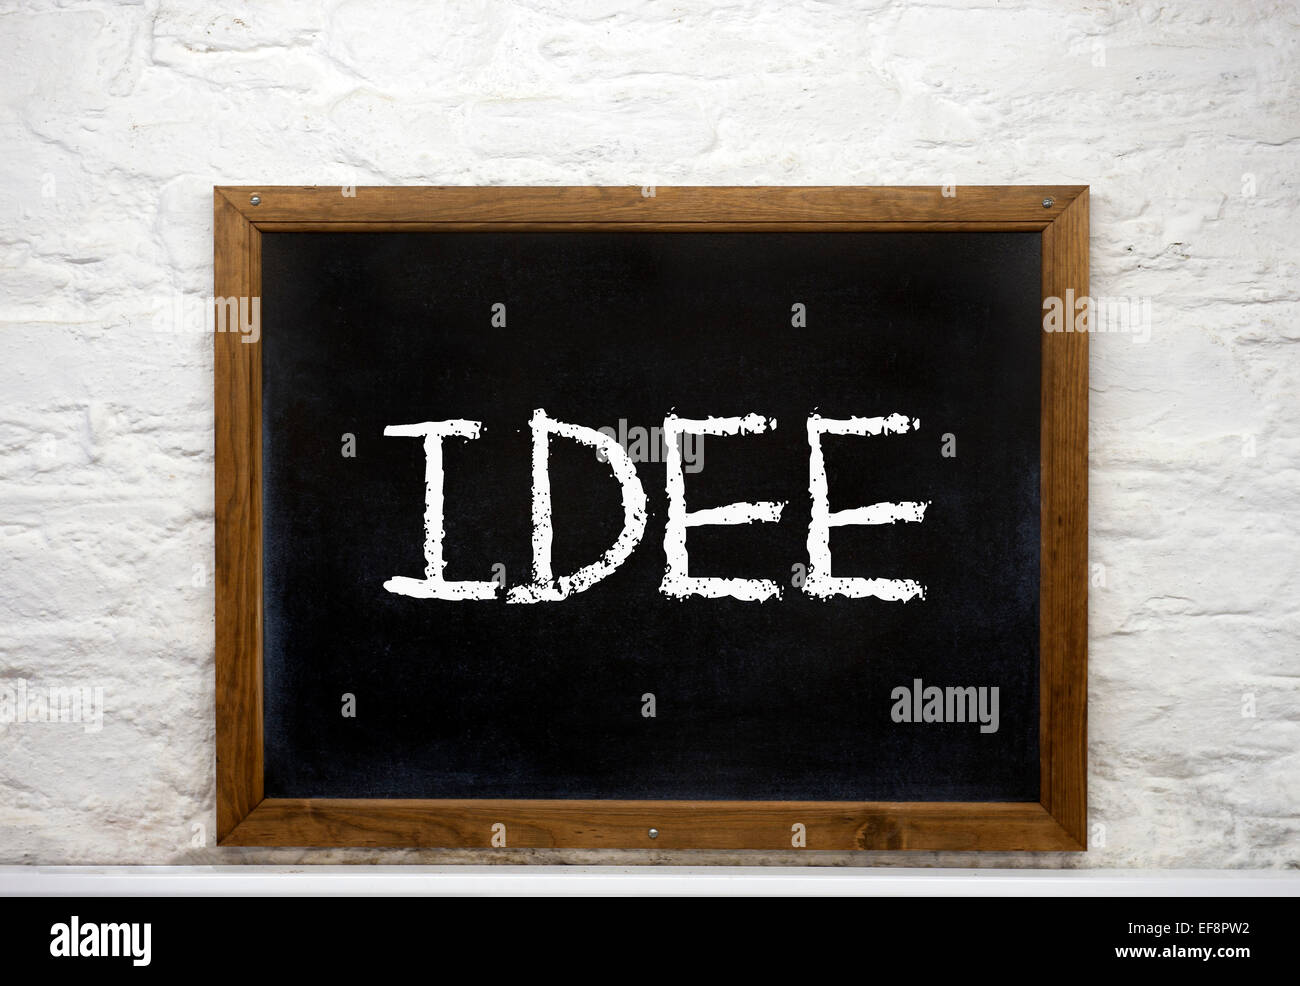 Chalkboard with the word 'Idee', German for idea Stock Photo